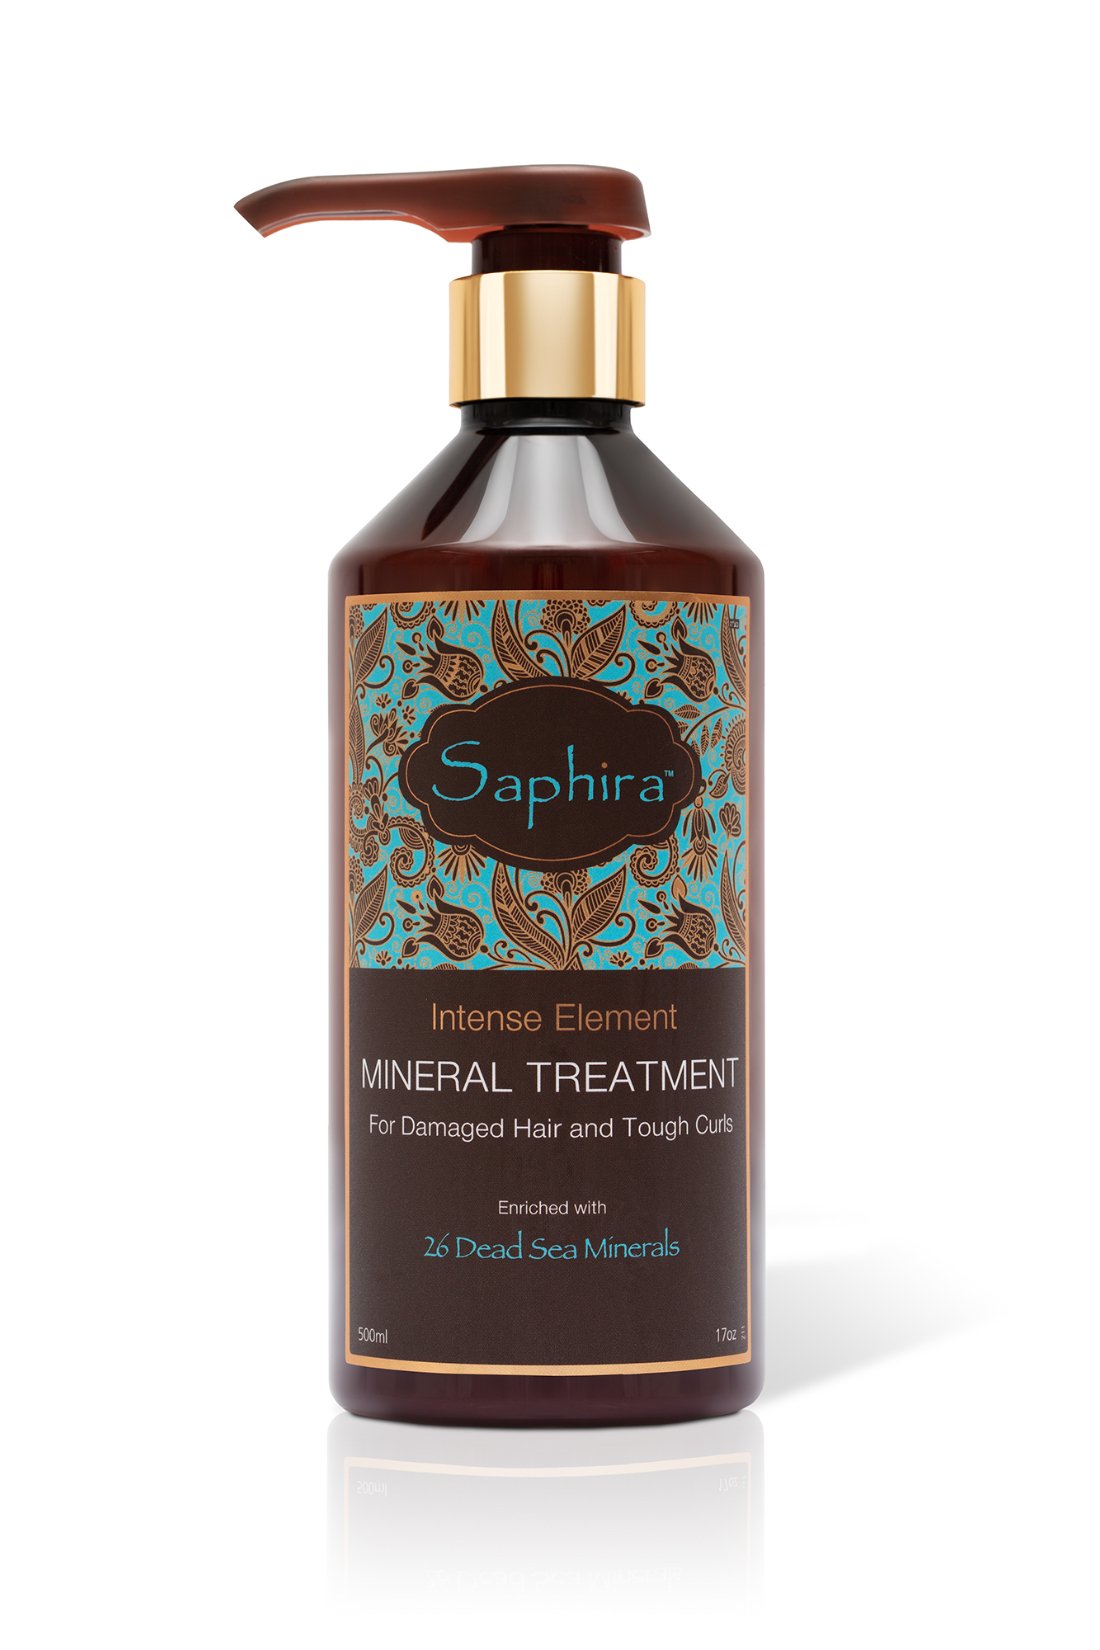 Saphira Intense Element Mineral Treatment for Damaged Hair and Tough Curls - smoothing treatment